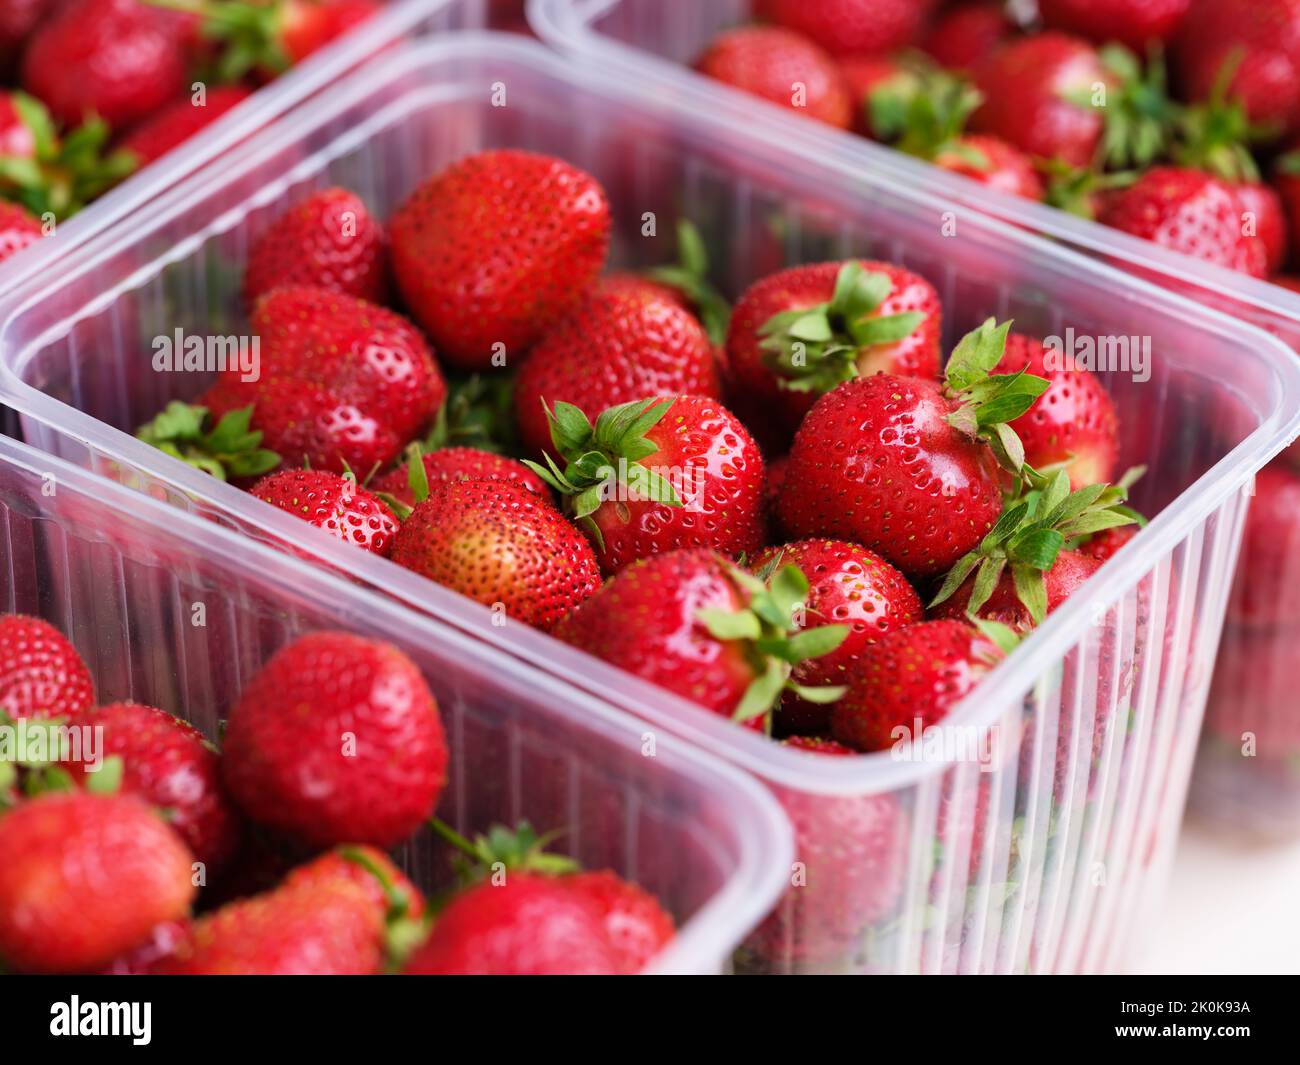 Some plastic containers full of ripe organic red strawberries Stock Photo